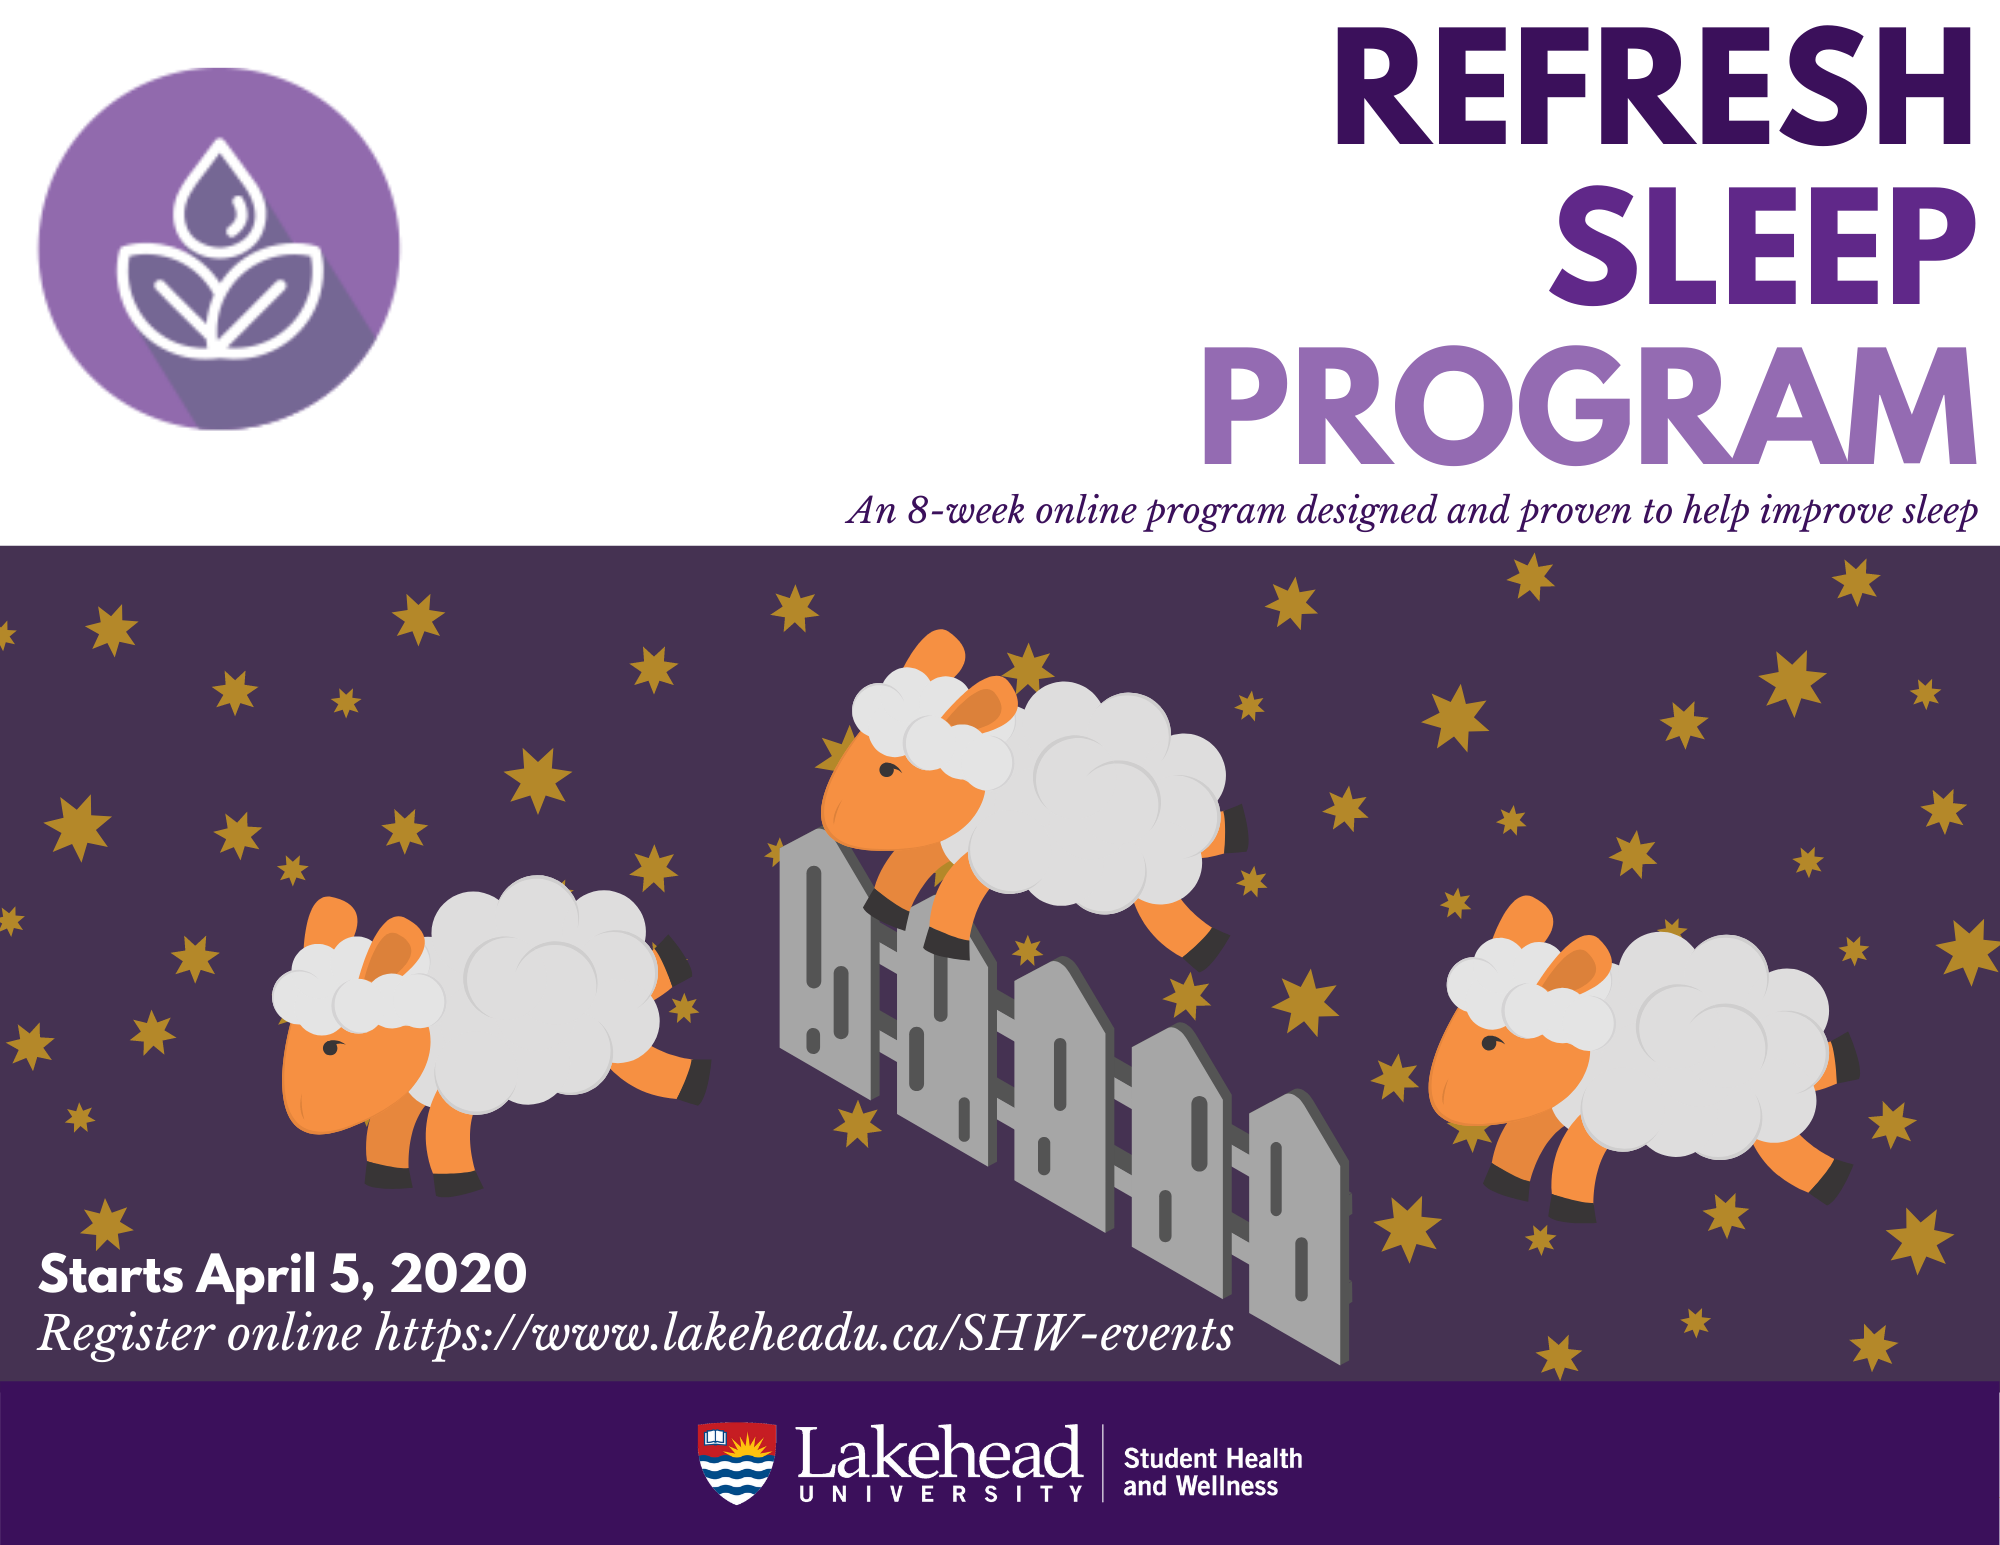 Refresh sleep program poster with information and pictures of sheep